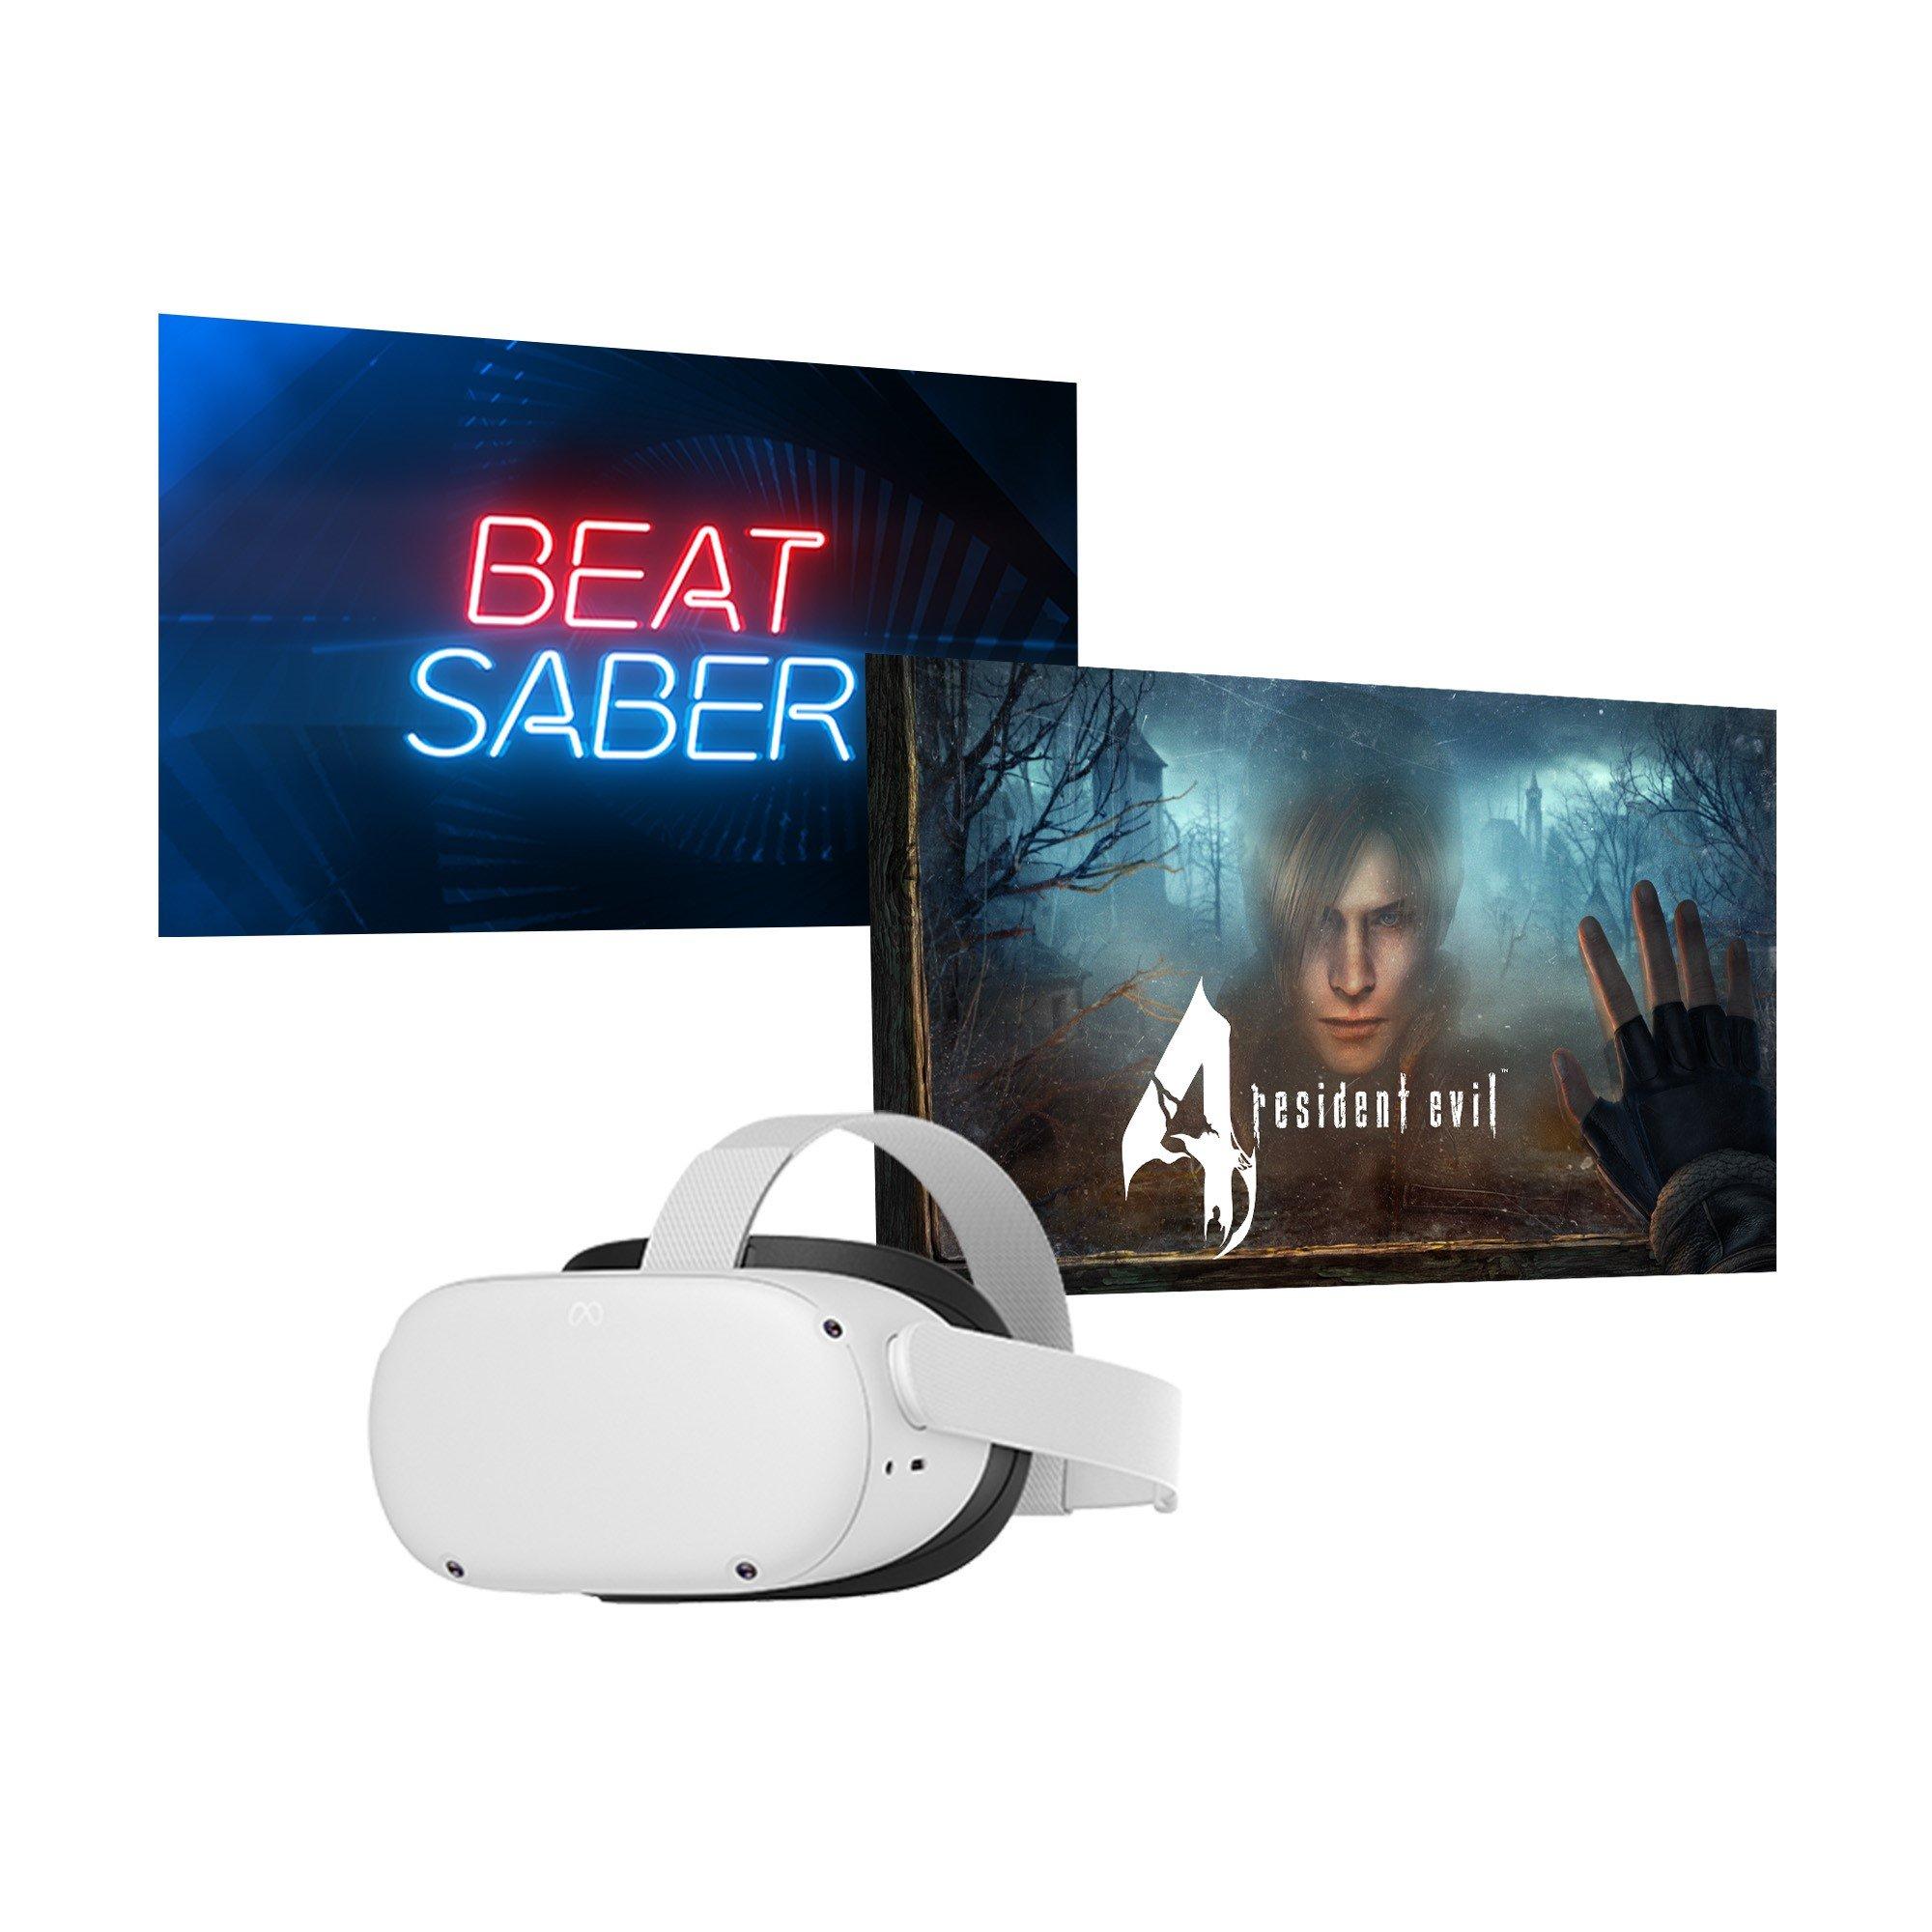 Meta Quest 2 with Resident Evil 4 and Beat Saber Bundle - 128GB